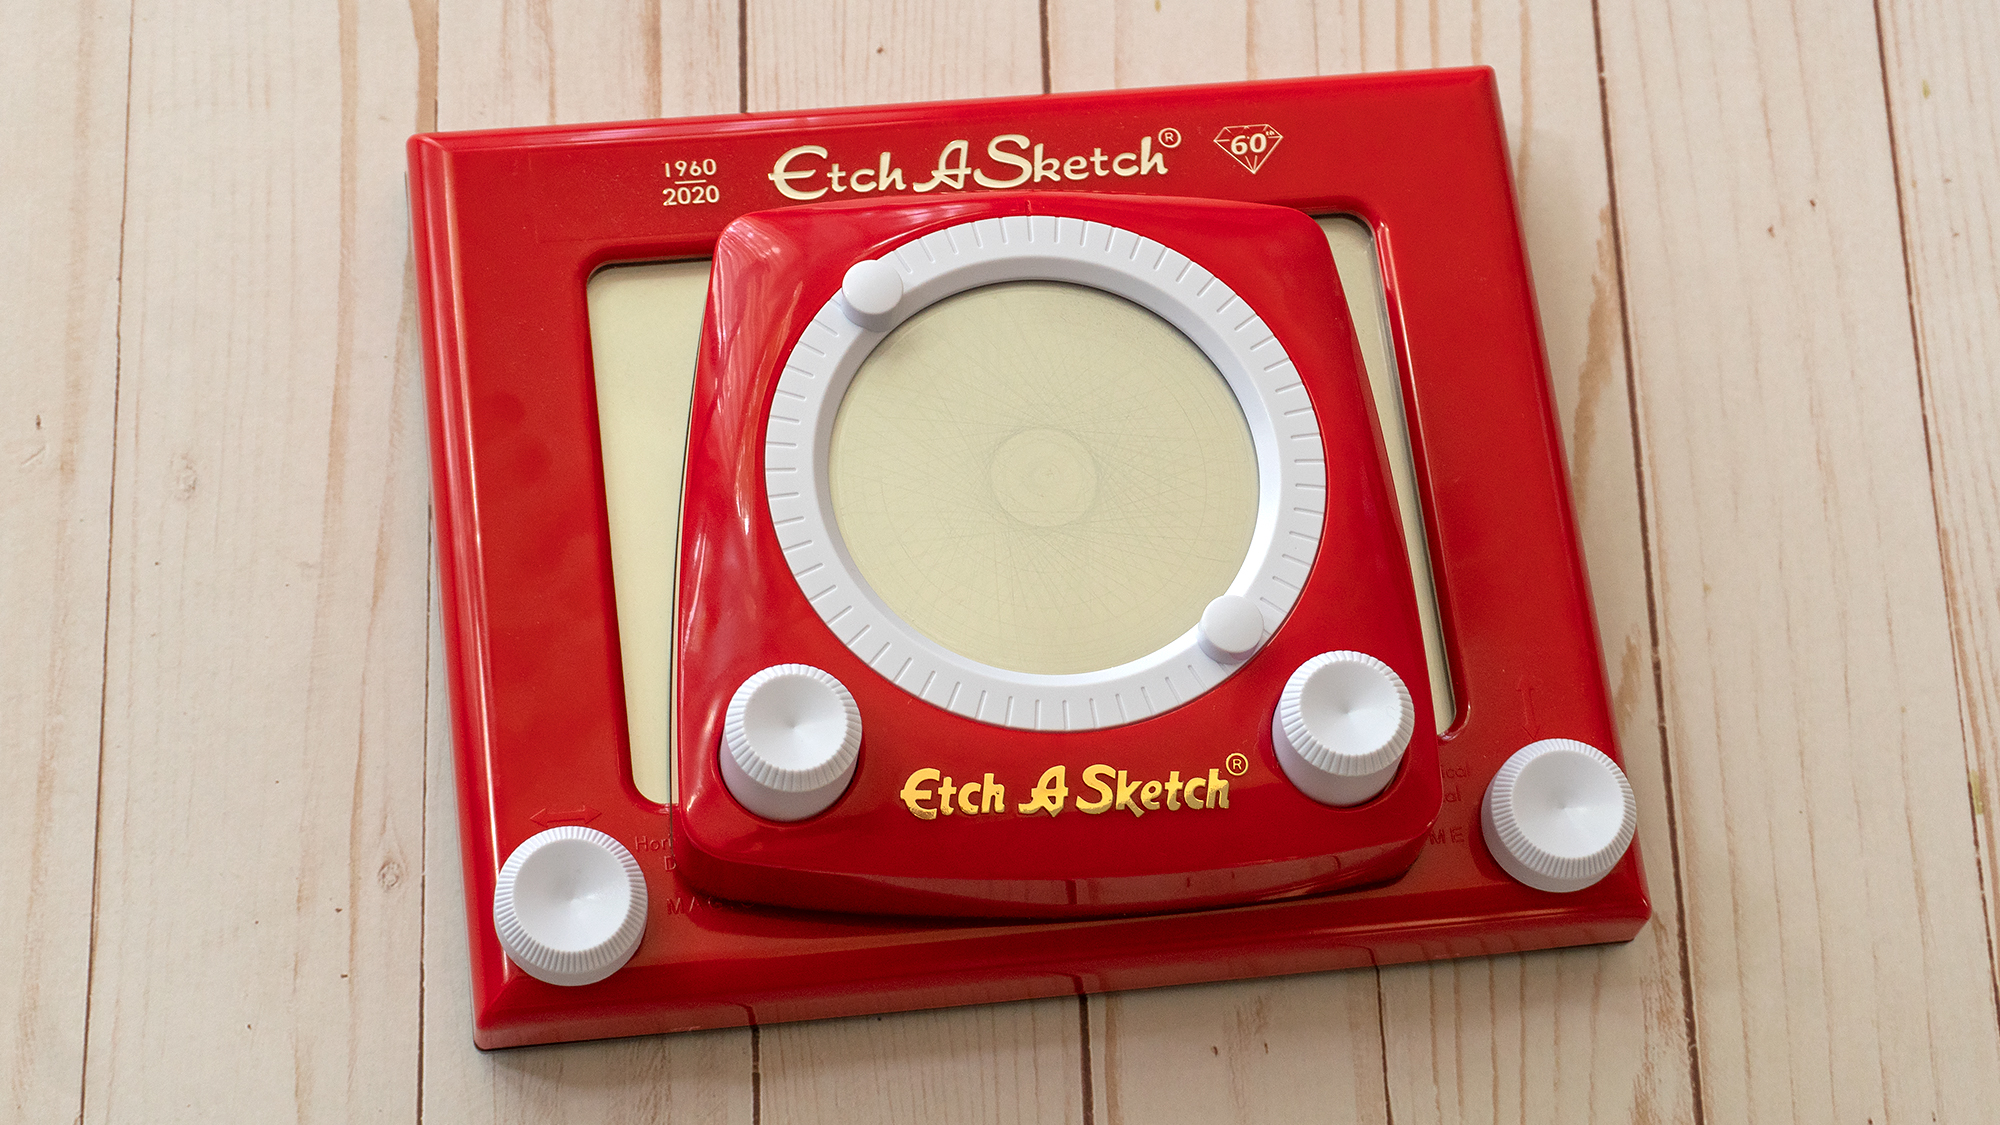 The Etch A Sketch Revolution is quite a bit smaller than the original, but it will also cost you just $US10 ($14). (Photo: Andrew Liszewski/Gizmodo)